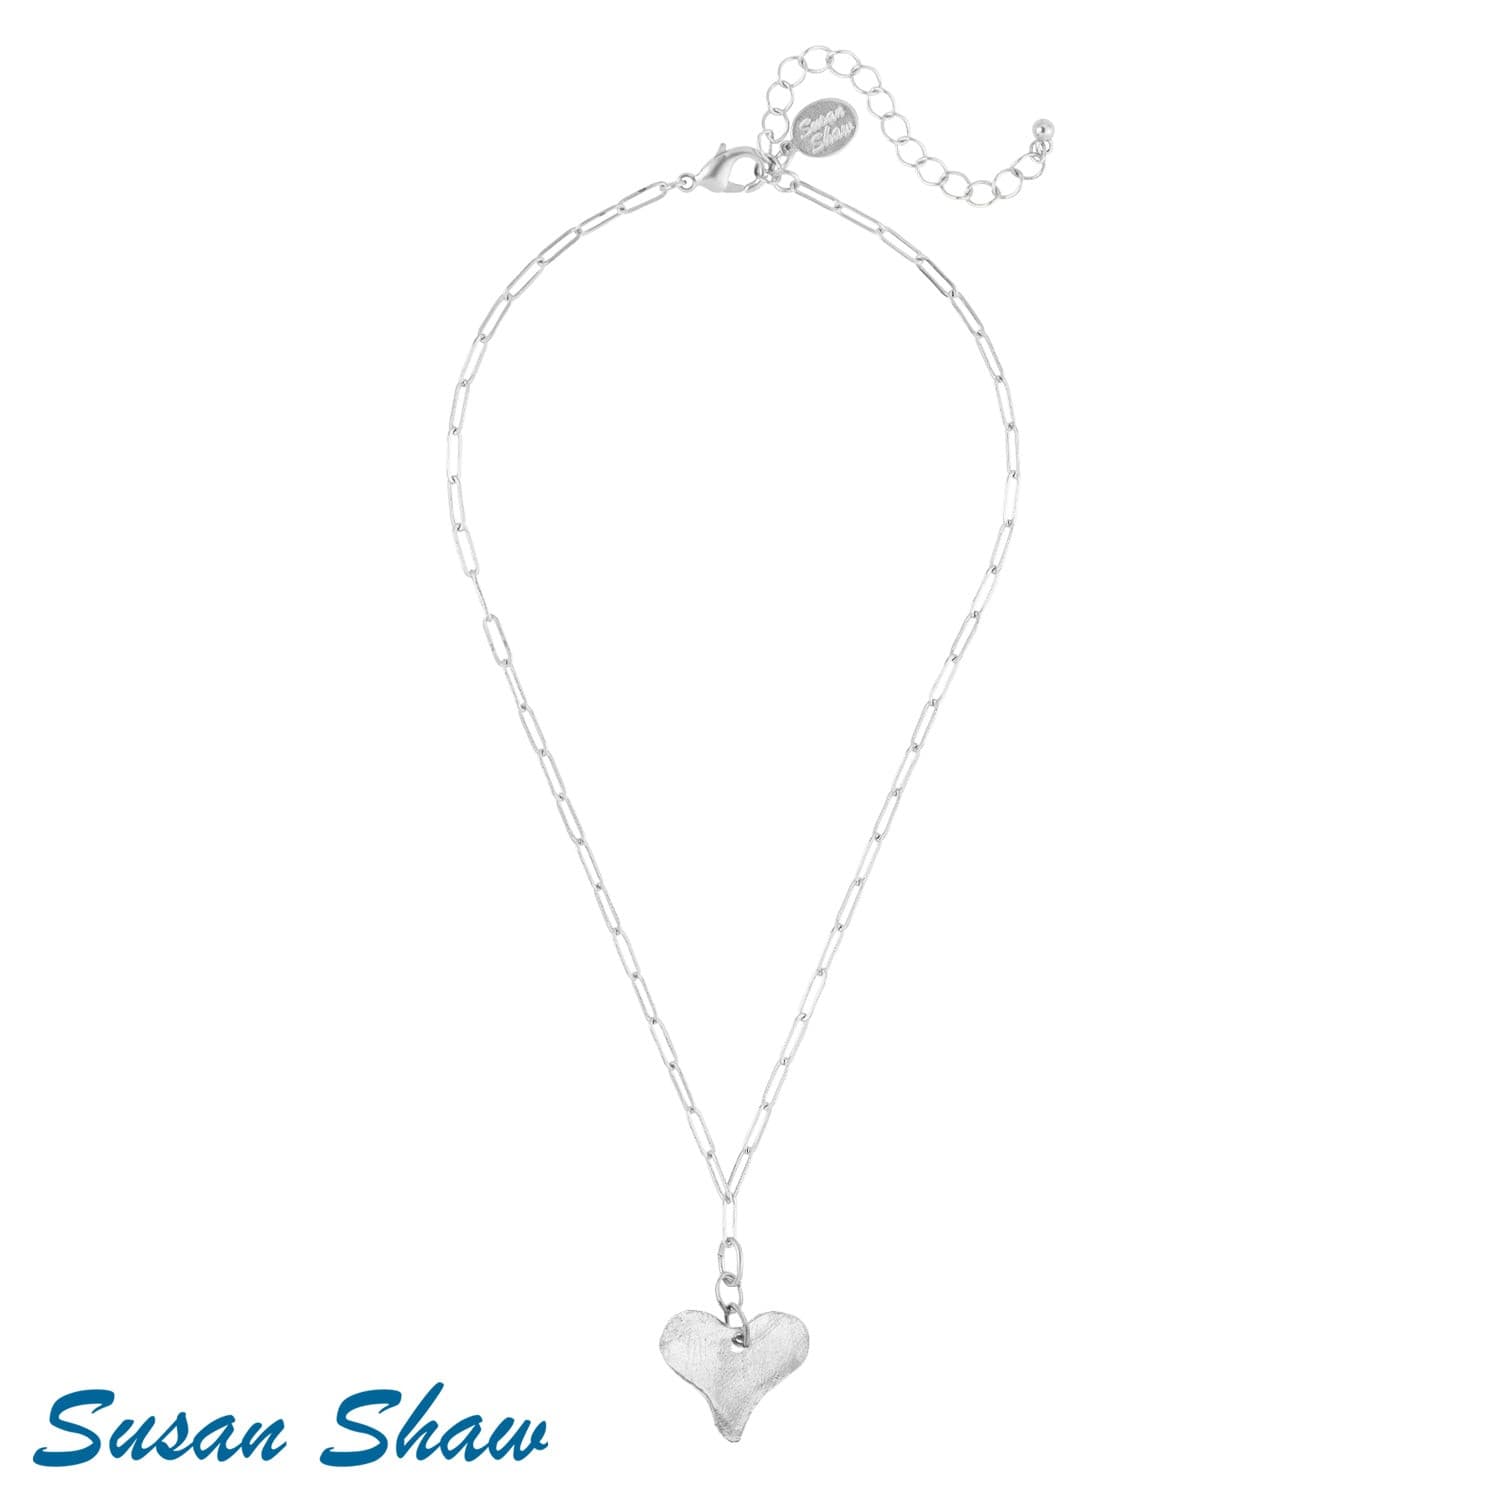 Susan Shaw Heart Paperclip Necklace (Silver).